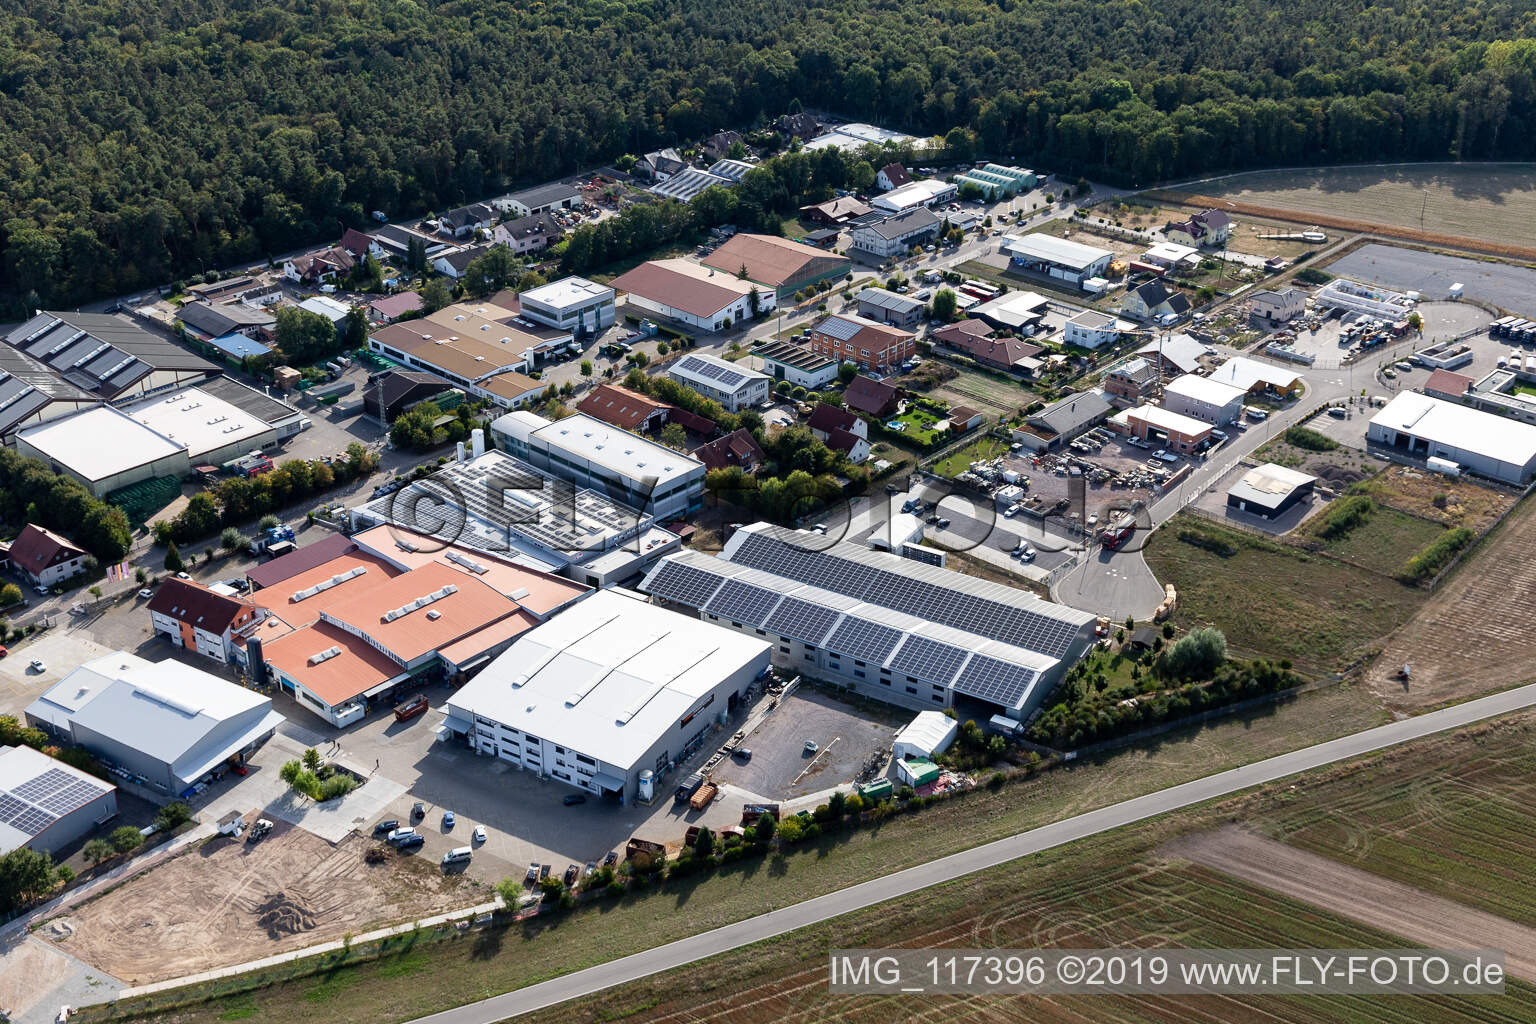 Commercial area Im Gereut, HGGS LaserCUT GmbH & Co. KG in Hatzenbühl in the state Rhineland-Palatinate, Germany seen from above